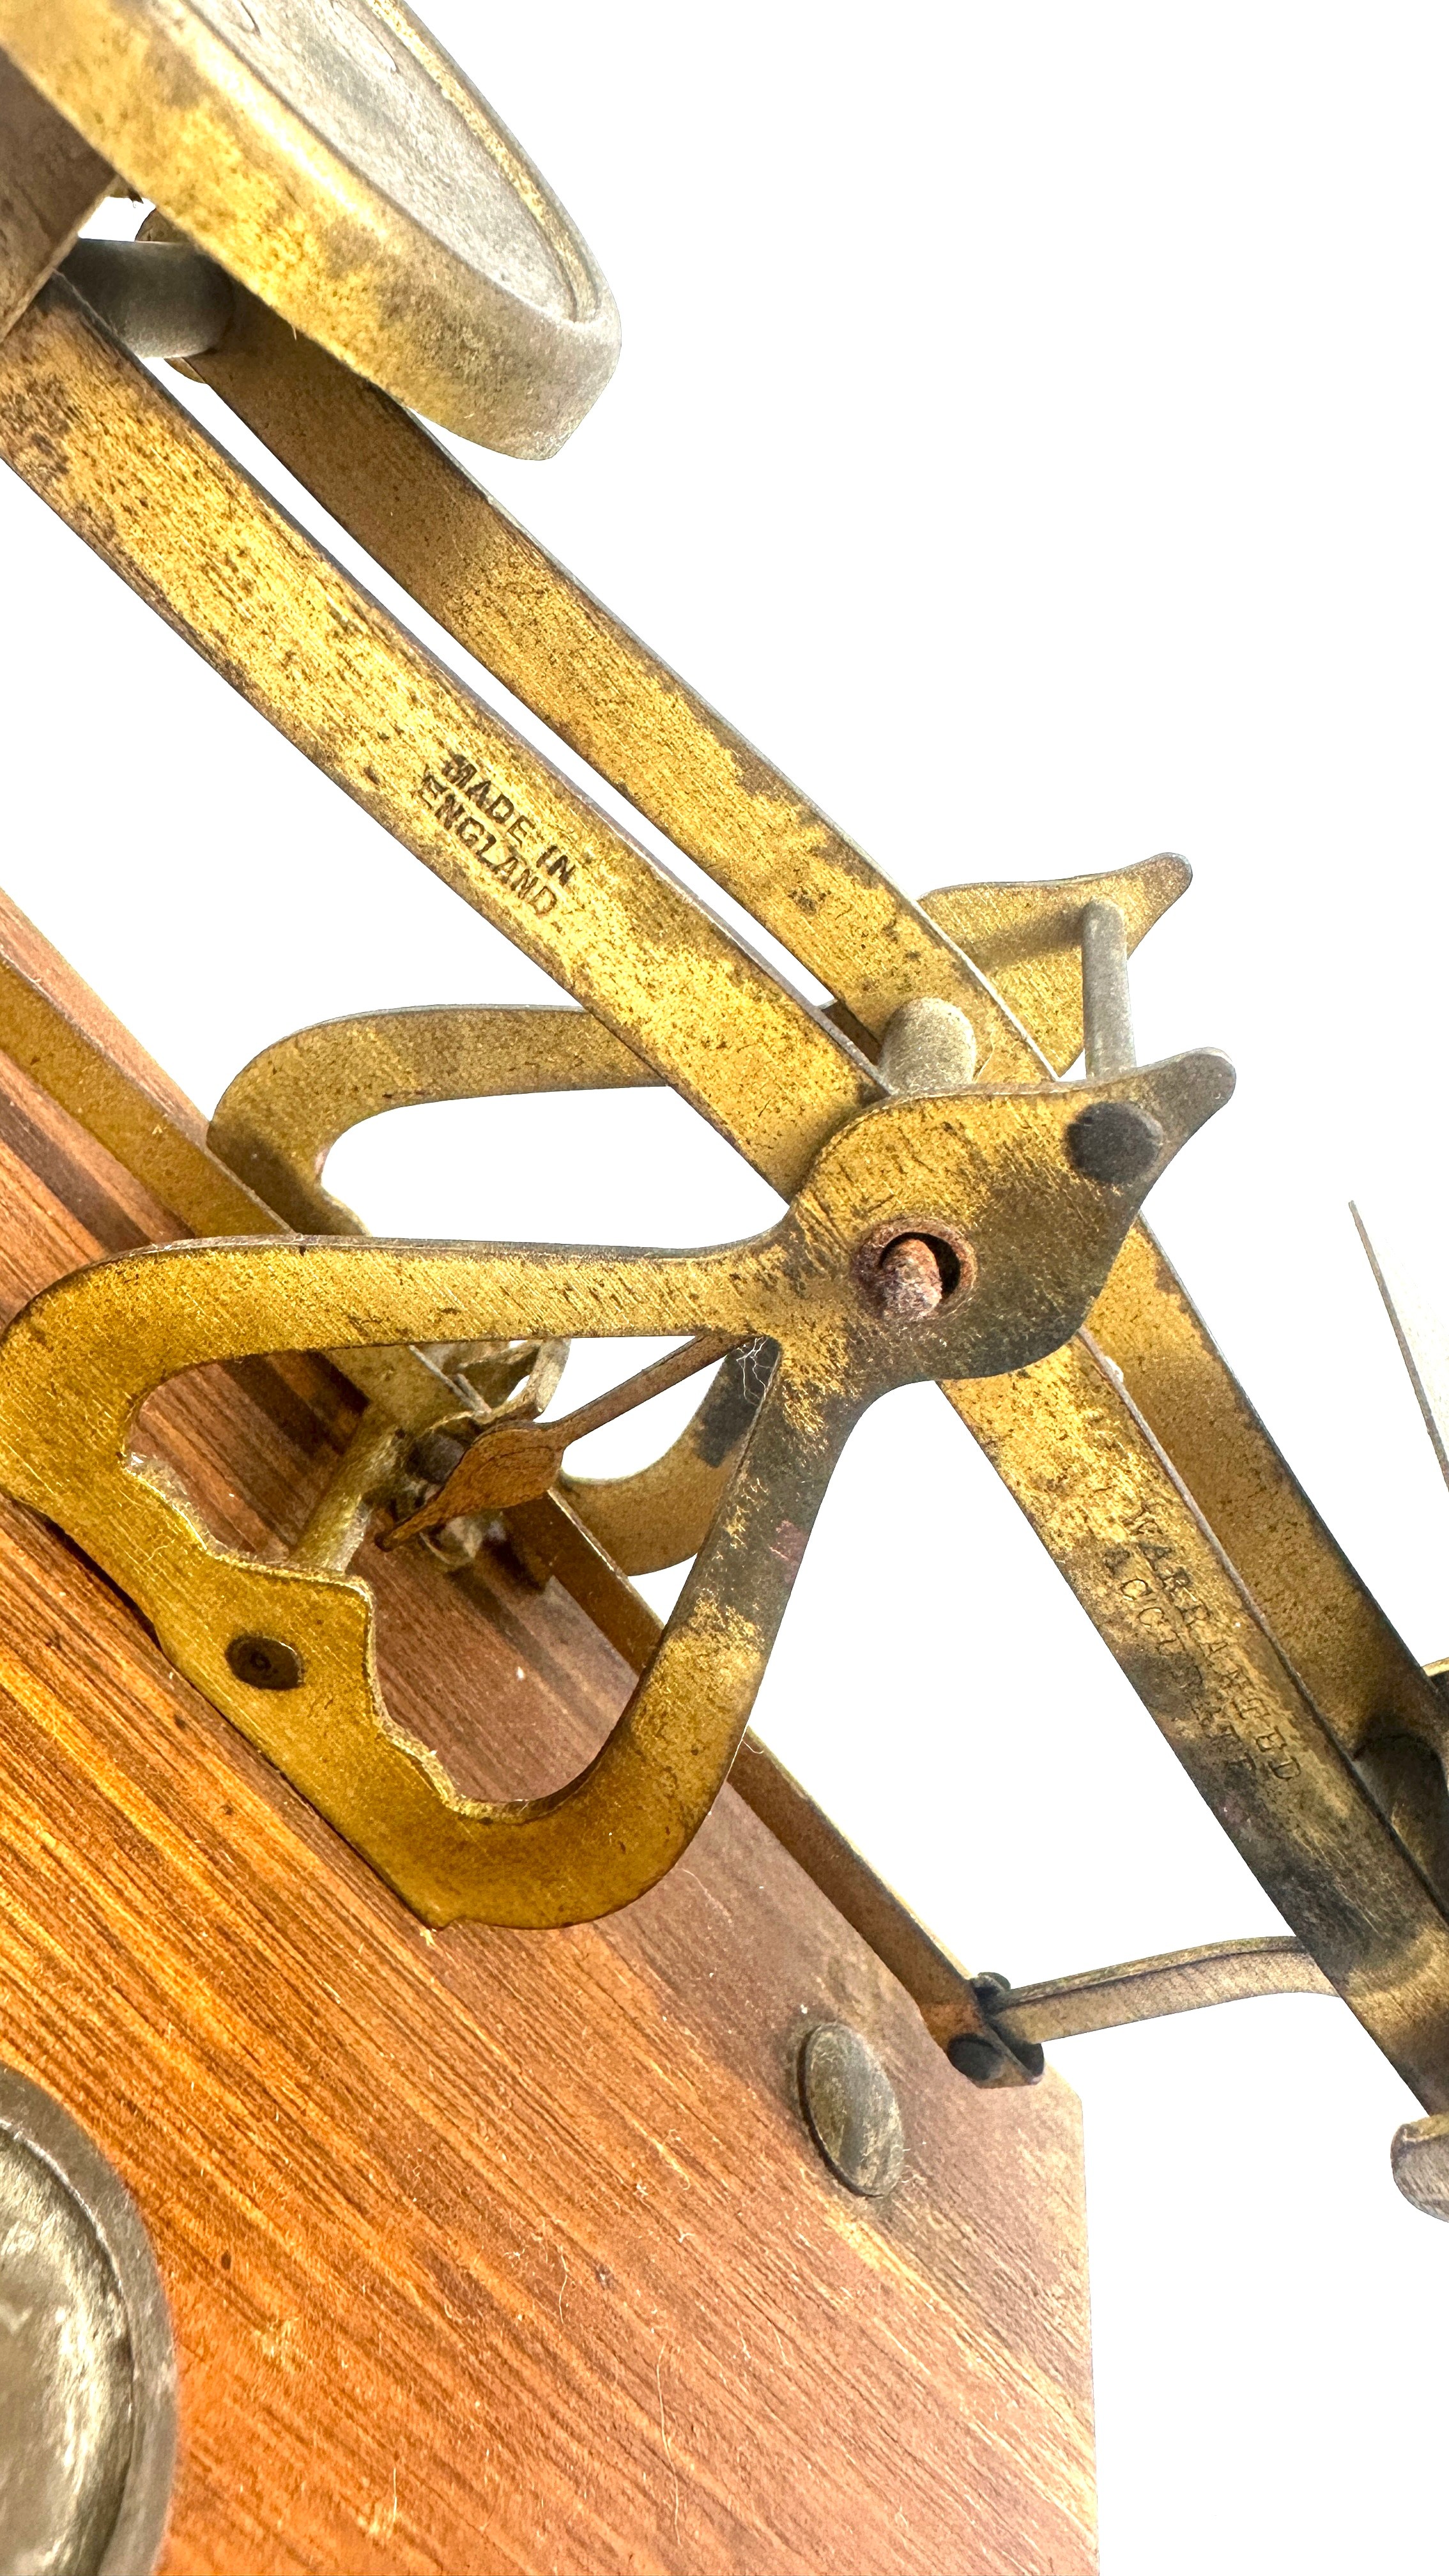 Set of vintage brass scales and weights - Image 2 of 3